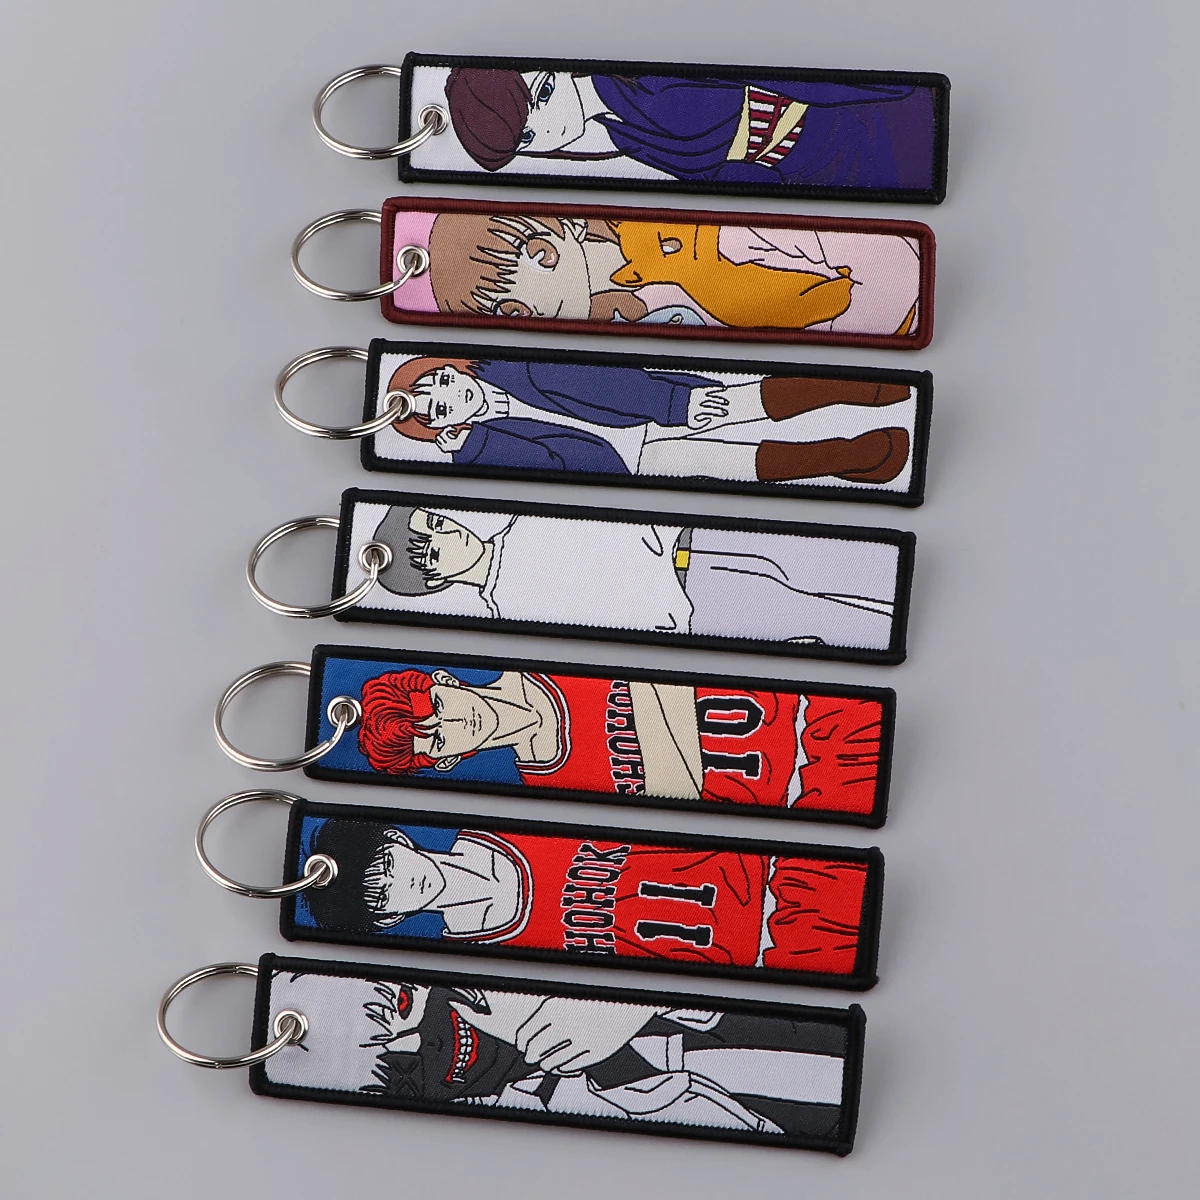 

Tokyo Ghoul Anime Key Tag Fruits Basket Embroidery Key Fobs Motorcycles Cars Backpack Chaveiro Fashion Keychain Key Ring